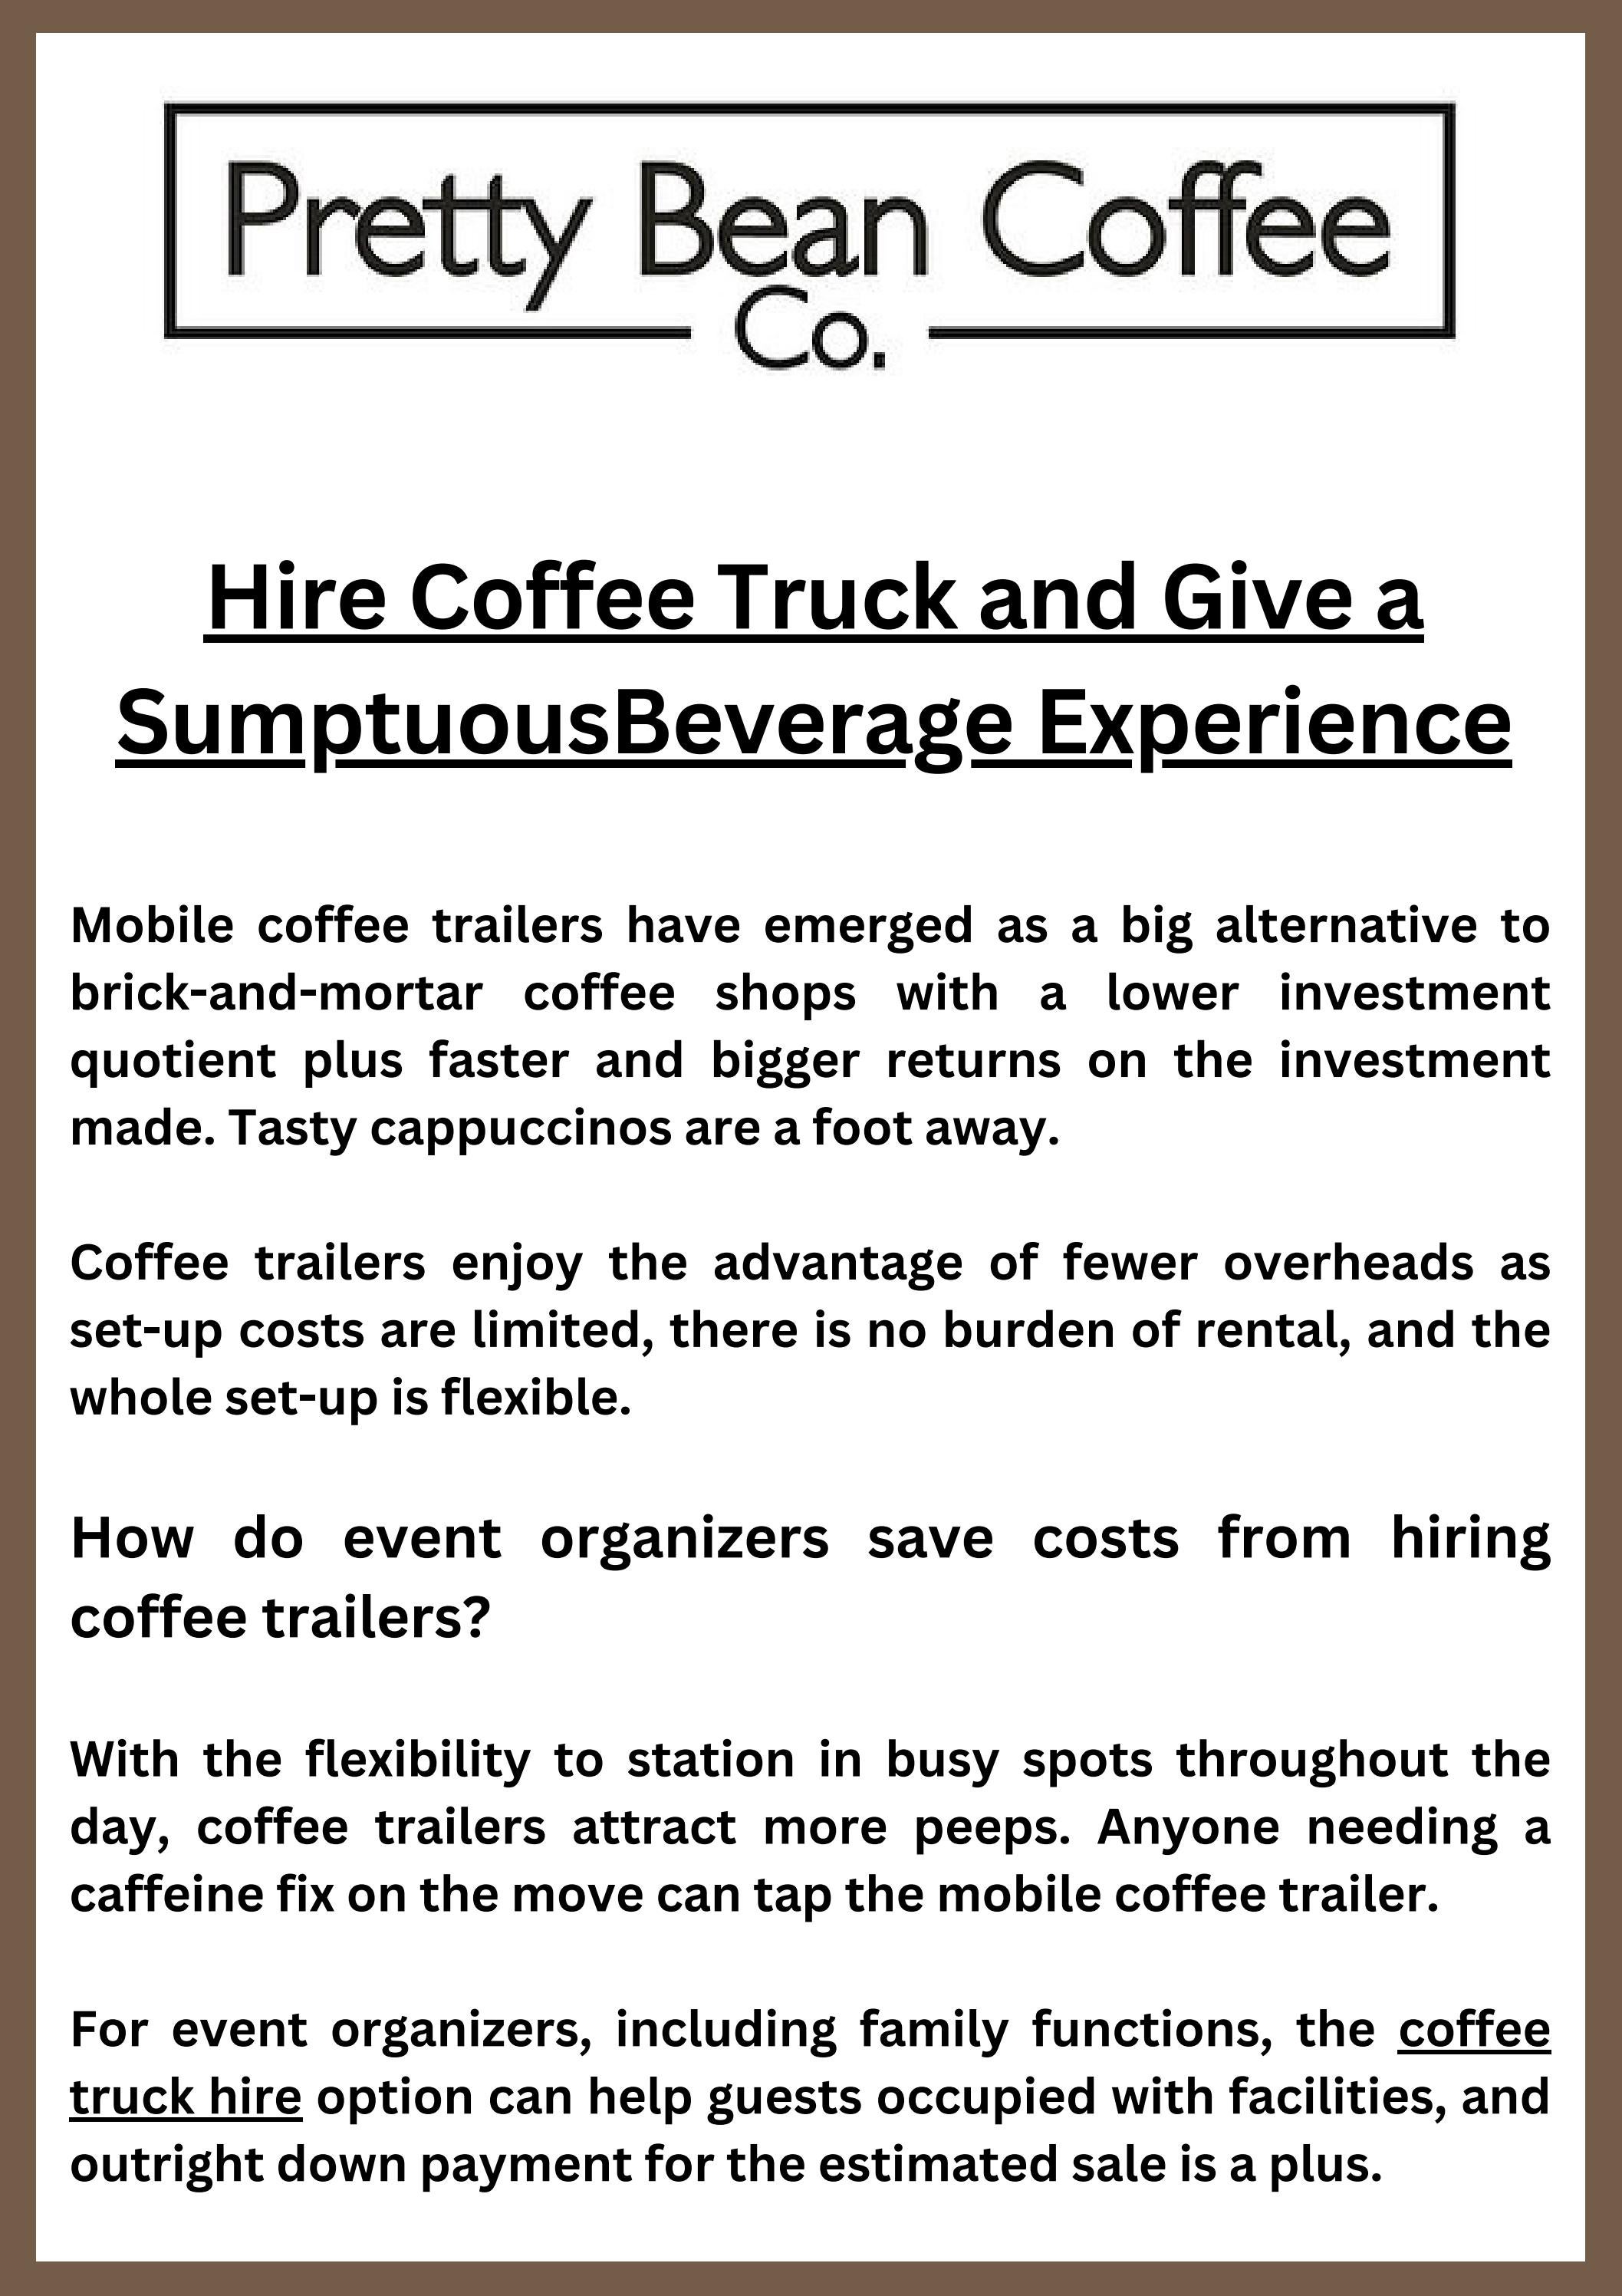 Hire Coffee Truck and Give a Sumptuous Beverage Experience